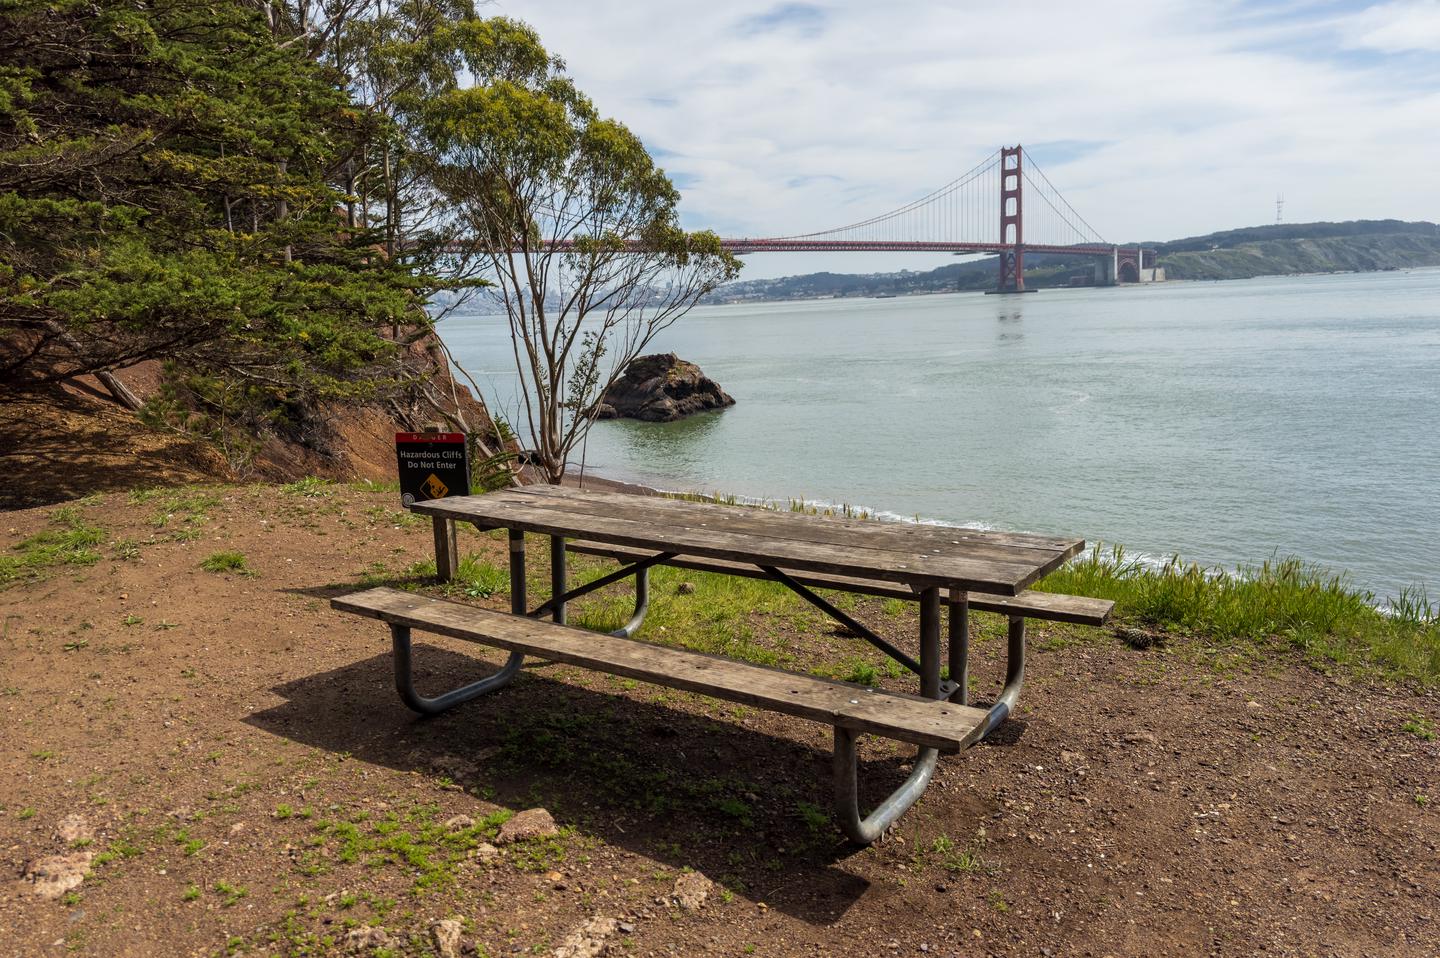 Picnic table at the cliff's edge of Site 1. In background is the bay waters and the Golden Gate Bridge.View of the Golden Gate Bridge from Site 1.